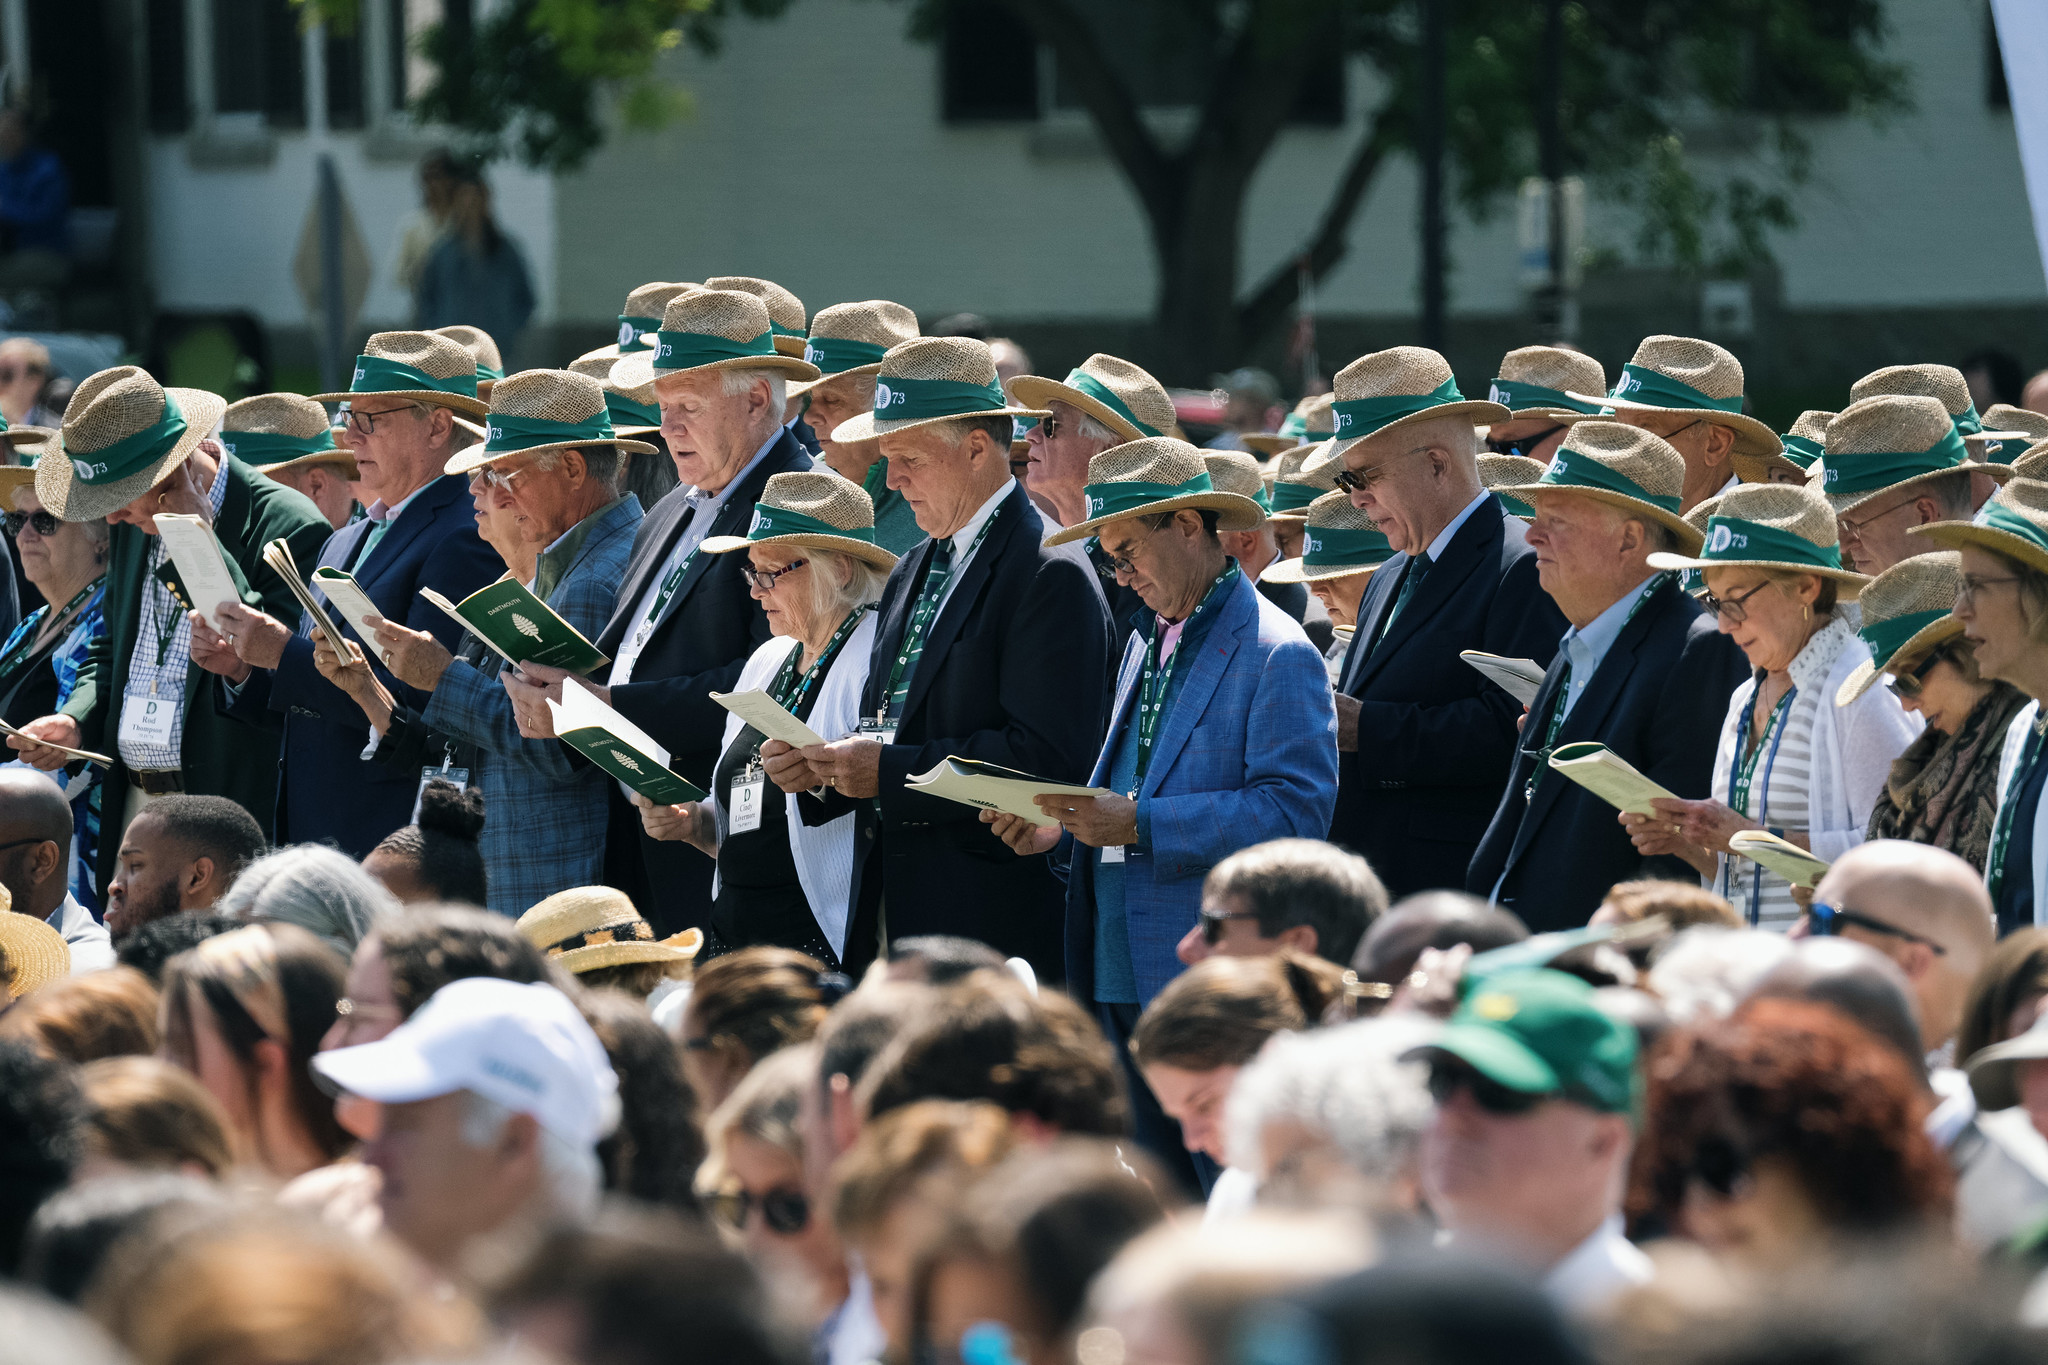 Class of 73 at commencement in matching straw hats